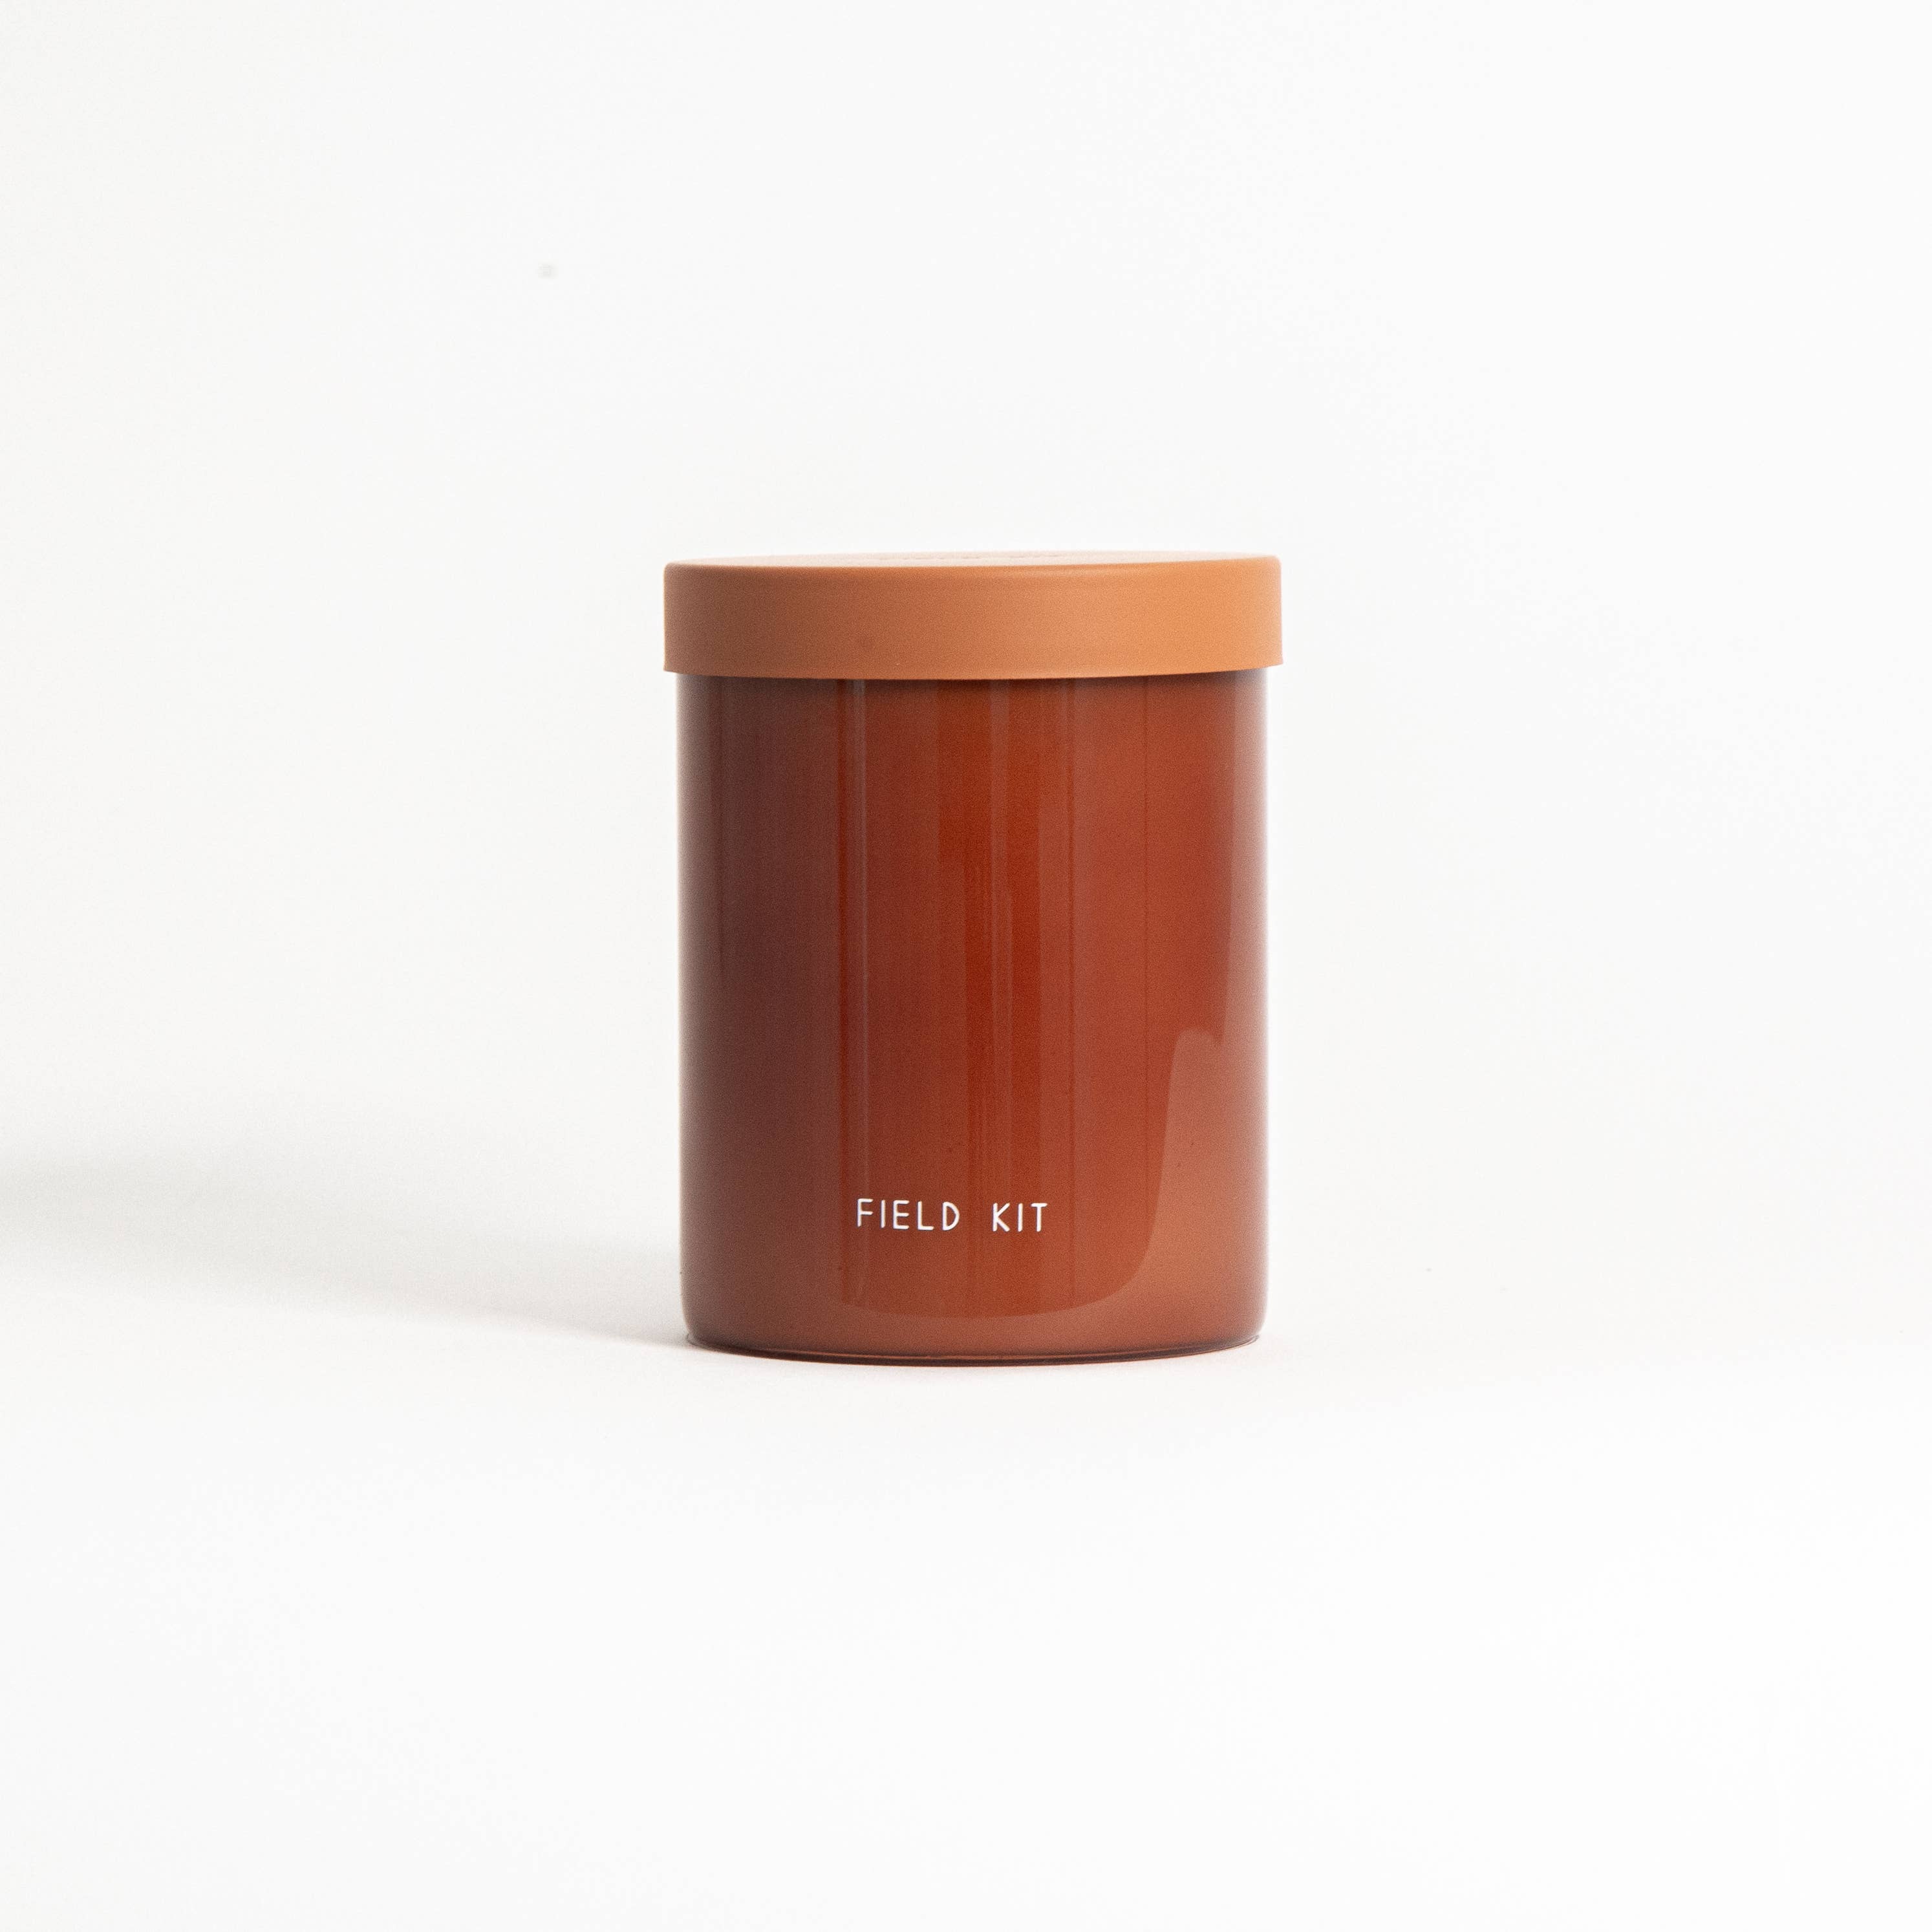 Field Kit | The Professor Glass Candle